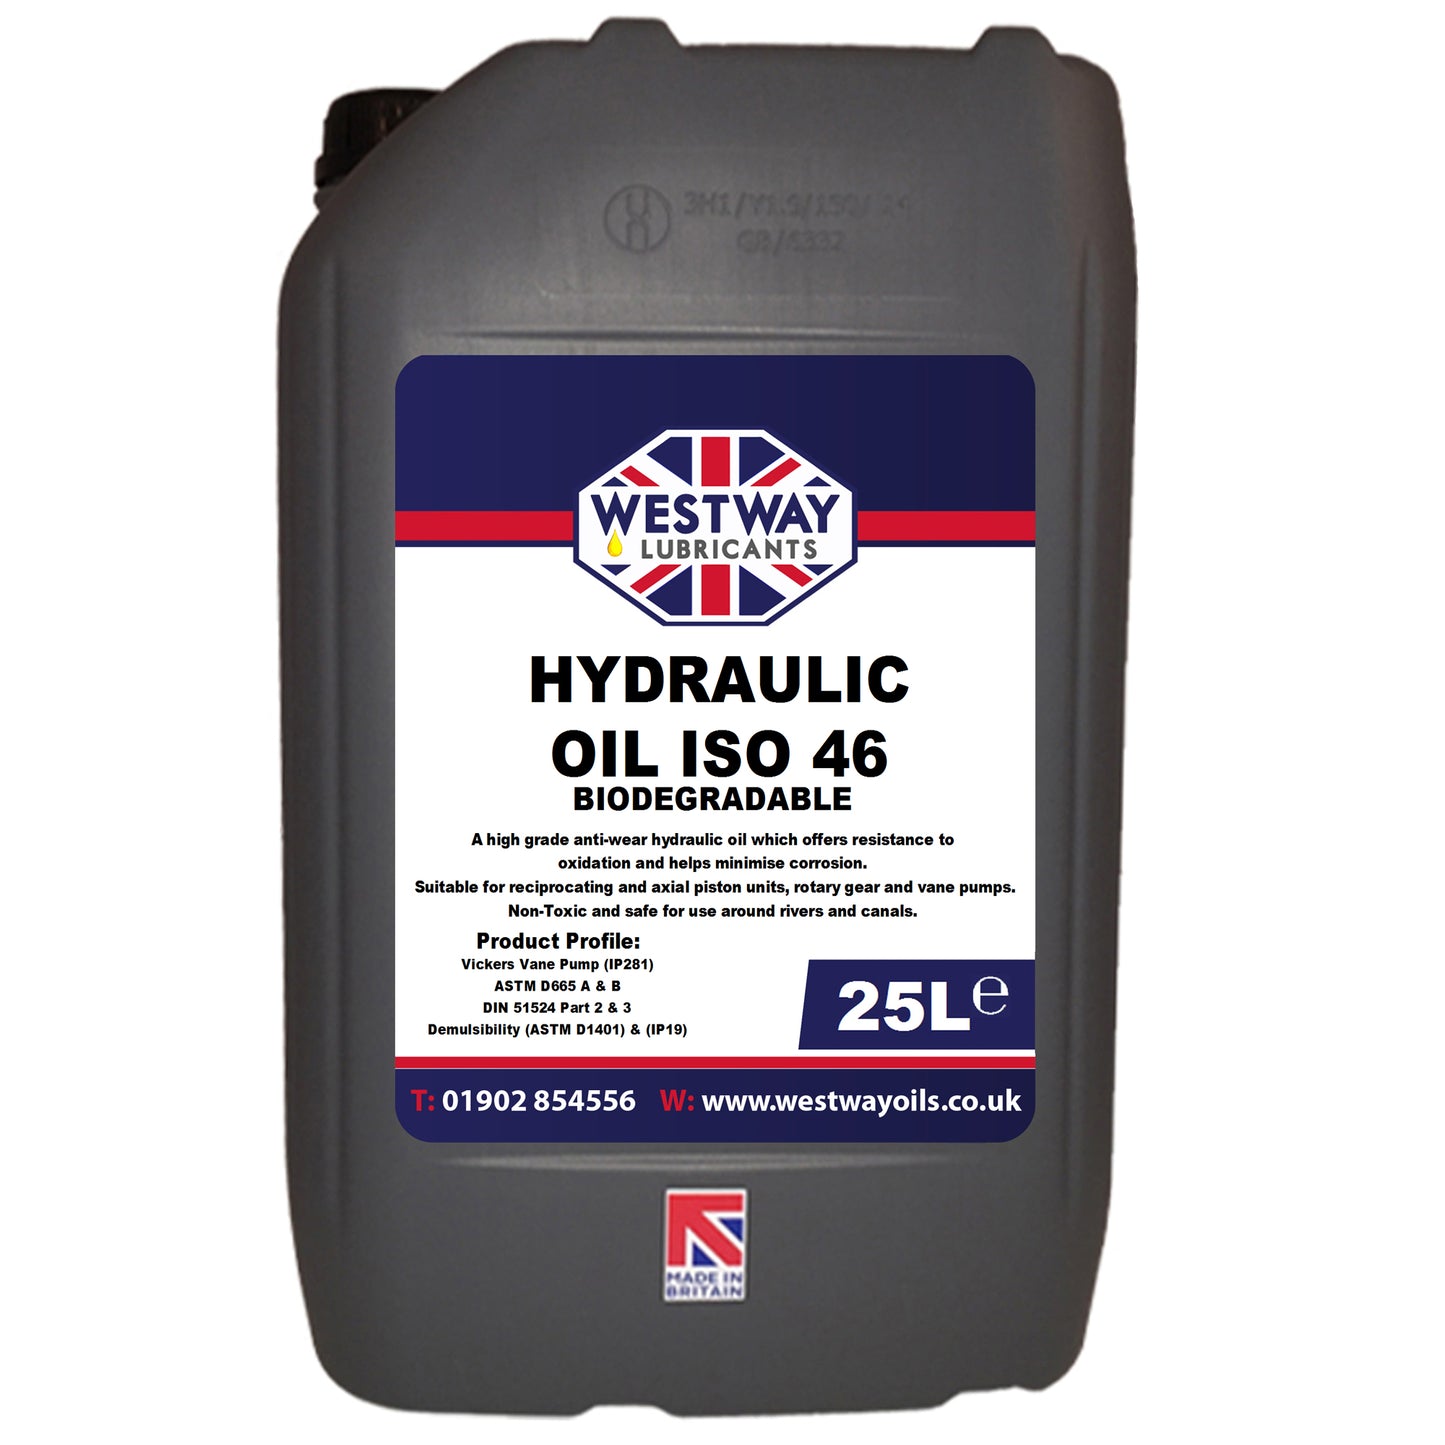 Biodegradable Hydraulic Oil ISO 46 / VG 46